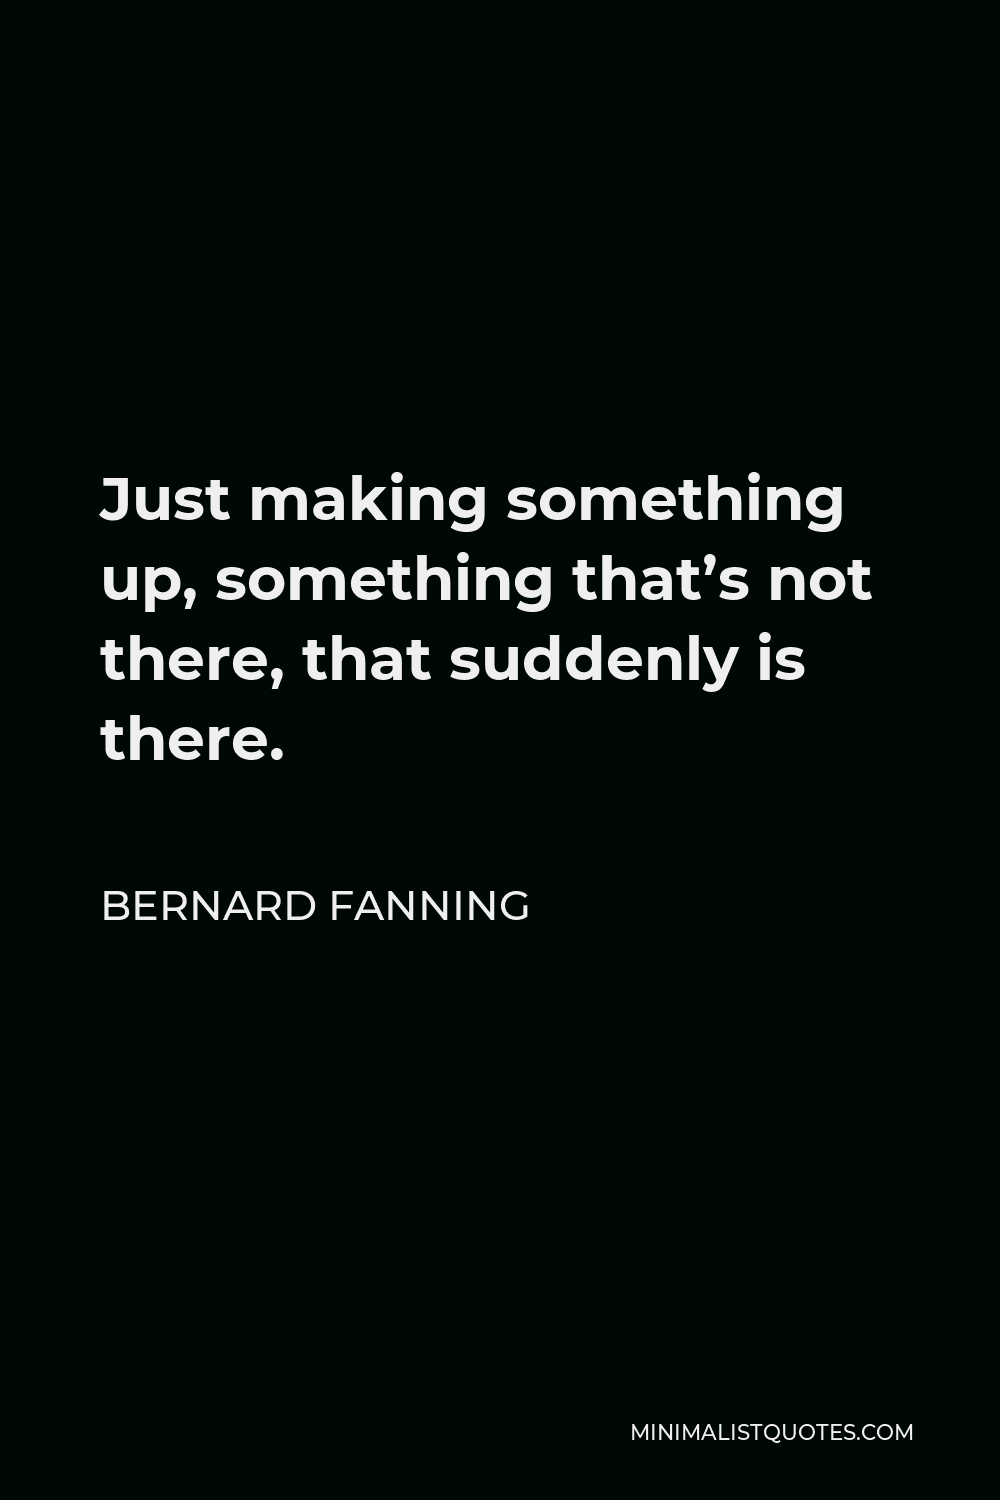 Bernard Fanning Quote - Just making something up, something that’s not there, that suddenly is there.